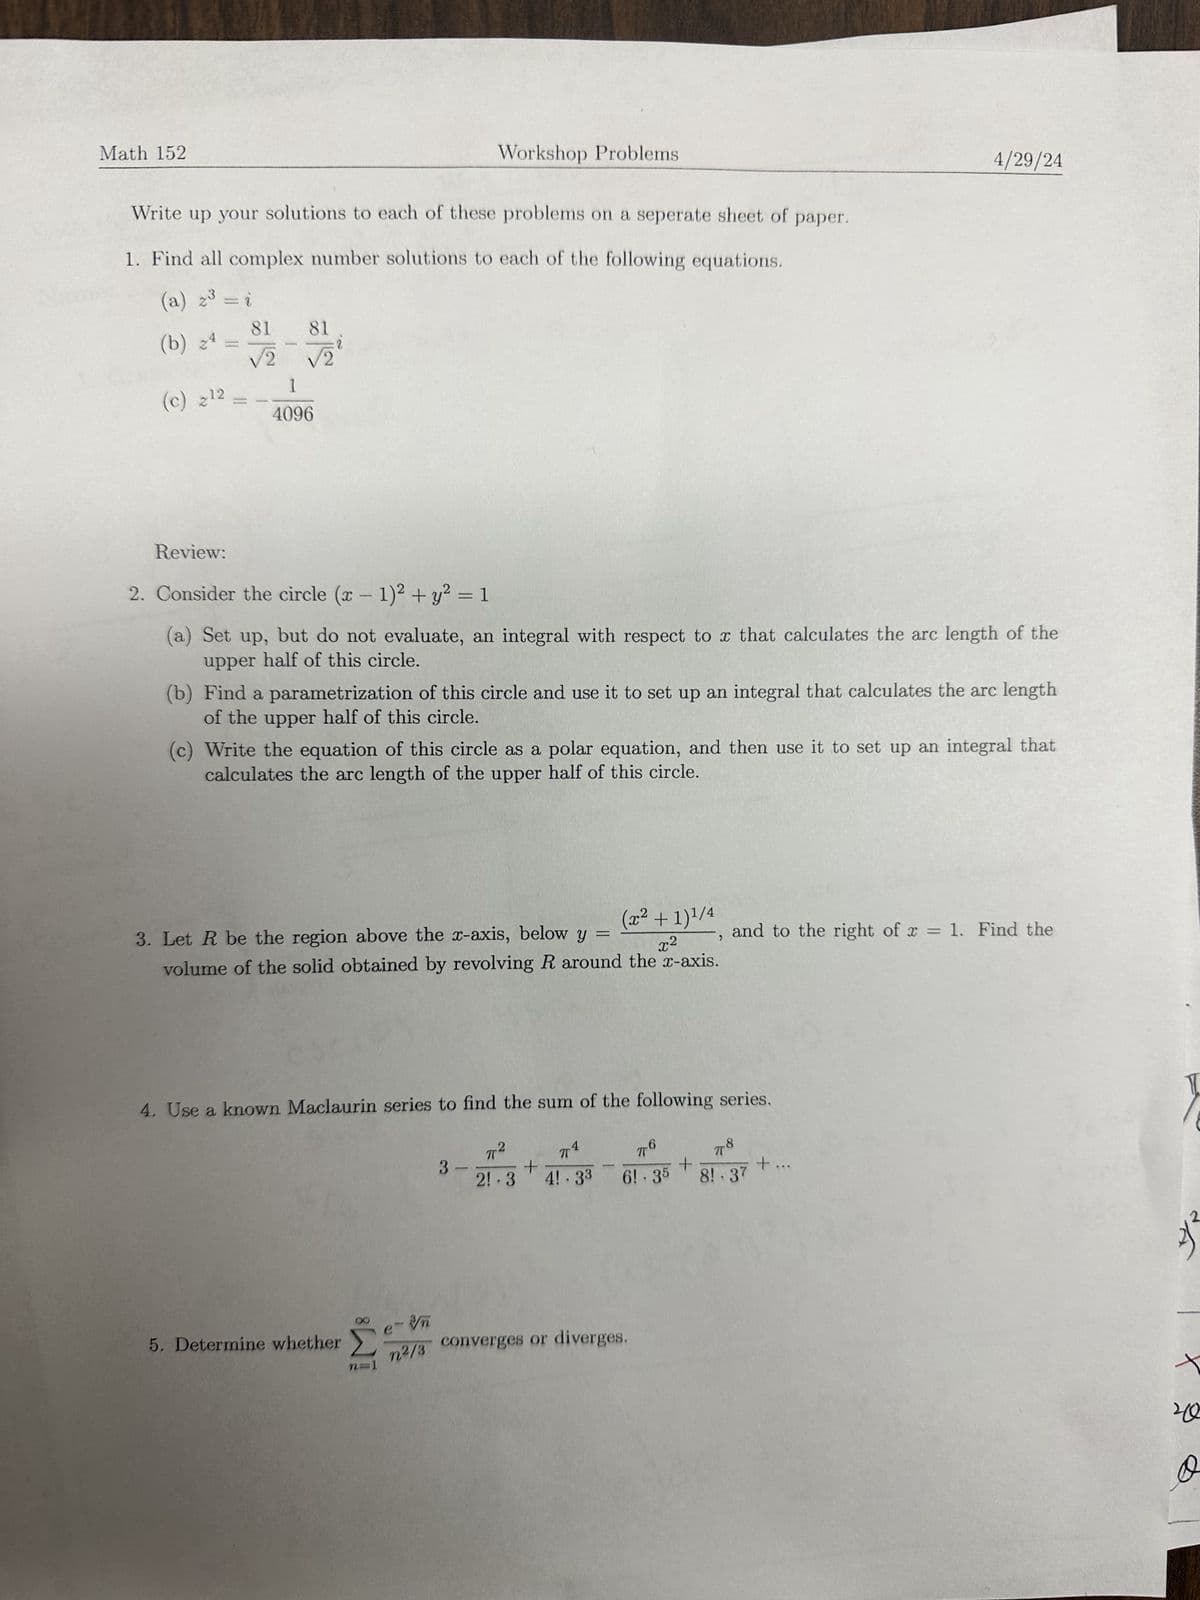 Math 152
Workshop Problems
Write up your solutions to each of these problems on a seperate sheet of paper.
1. Find all complex number solutions to each of the following equations.
(a) 2³ = i
(b) 24
(c) 212
1
81
81
√2
√2
1
4096
4/29/24
Review:
2. Consider the circle (x - 1)2 + y² = 1
(a) Set up, but do not evaluate, an integral with respect to x that calculates the arc length of the
upper half of this circle.
(b) Find a parametrization of this circle and use it to set up an integral that calculates the arc length
of the upper half of this circle.
(c) Write the equation of this circle as a polar equation, and then use it to set up an integral that
calculates the arc length of the upper half of this circle.
(x² + 1) 1/4
=
and to the right of x = 1. Find the
3. Let R be the region above the x-axis, below y
x²
volume of the solid obtained by revolving R around the x-axis.
4. Use a known Maclaurin series to find the sum of the following series.
3-
774
π2
πο
+
+
2!.3 4!.33 6!.35 8!.37
78
+
5. Determine whether
Σ
e-n
n2/3
converges or diverges.
че